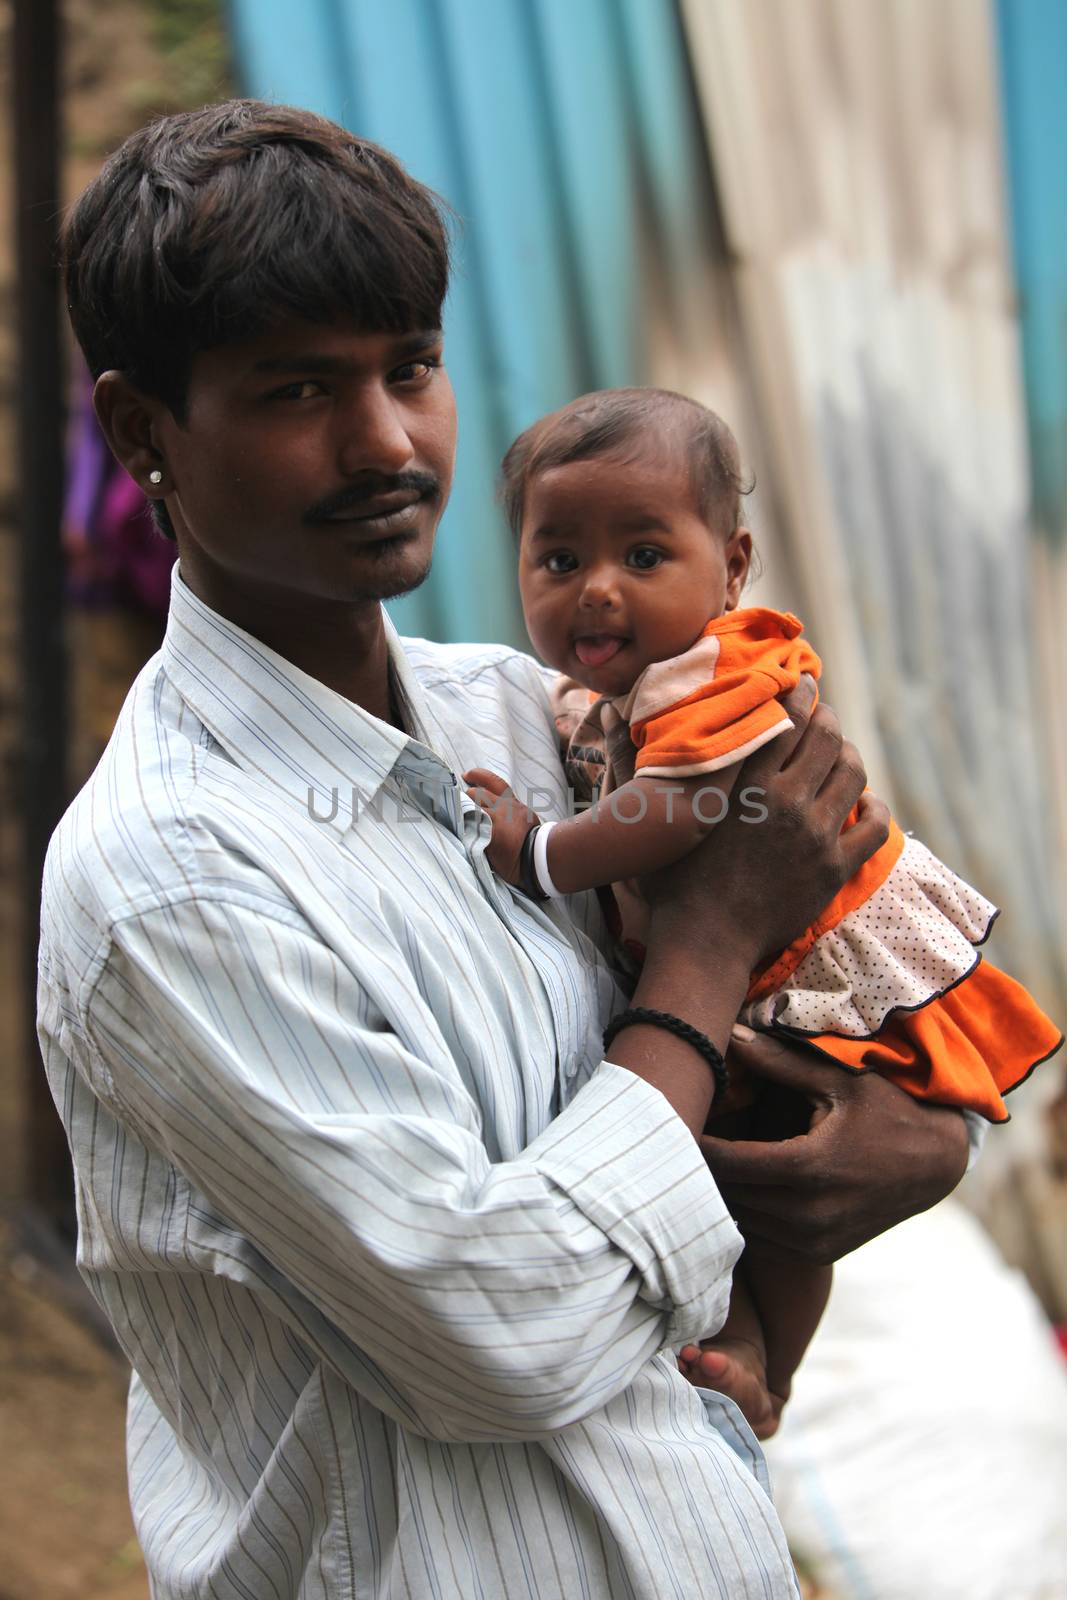 A portrait of a poor Indian father holding his little son, looking at him lovingly.